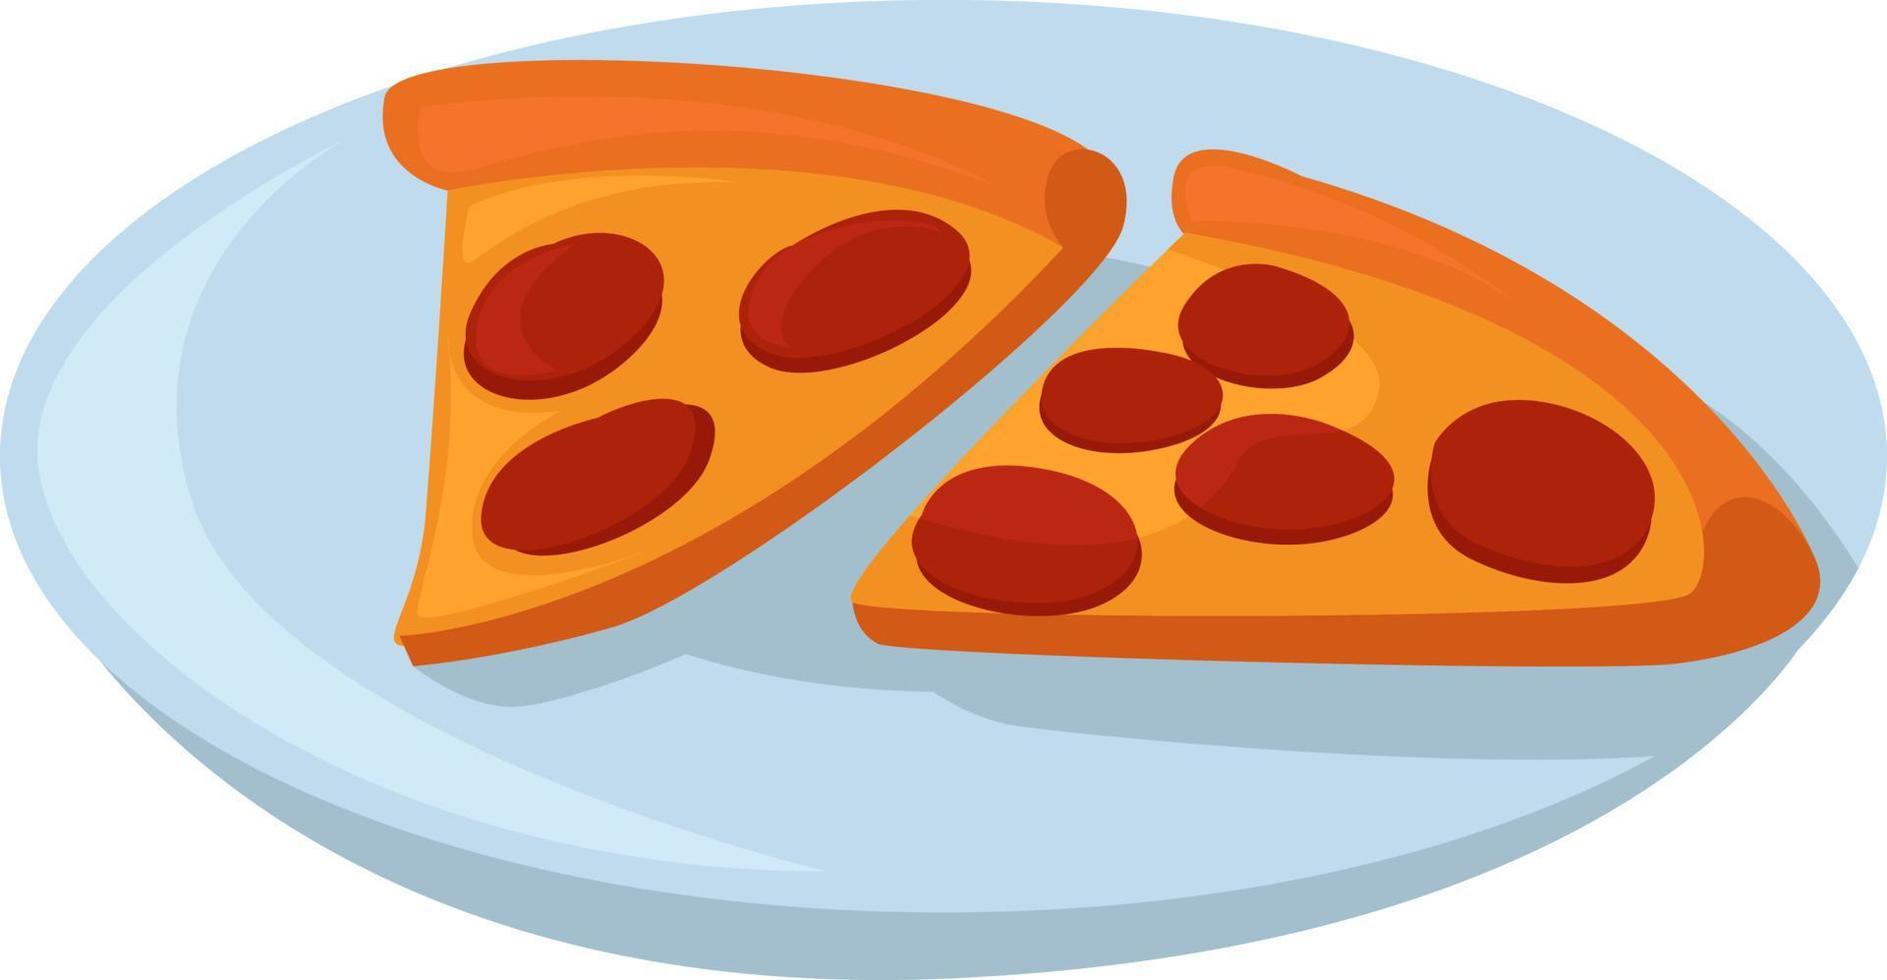 Pizza on a plate, illustration, vector on white background